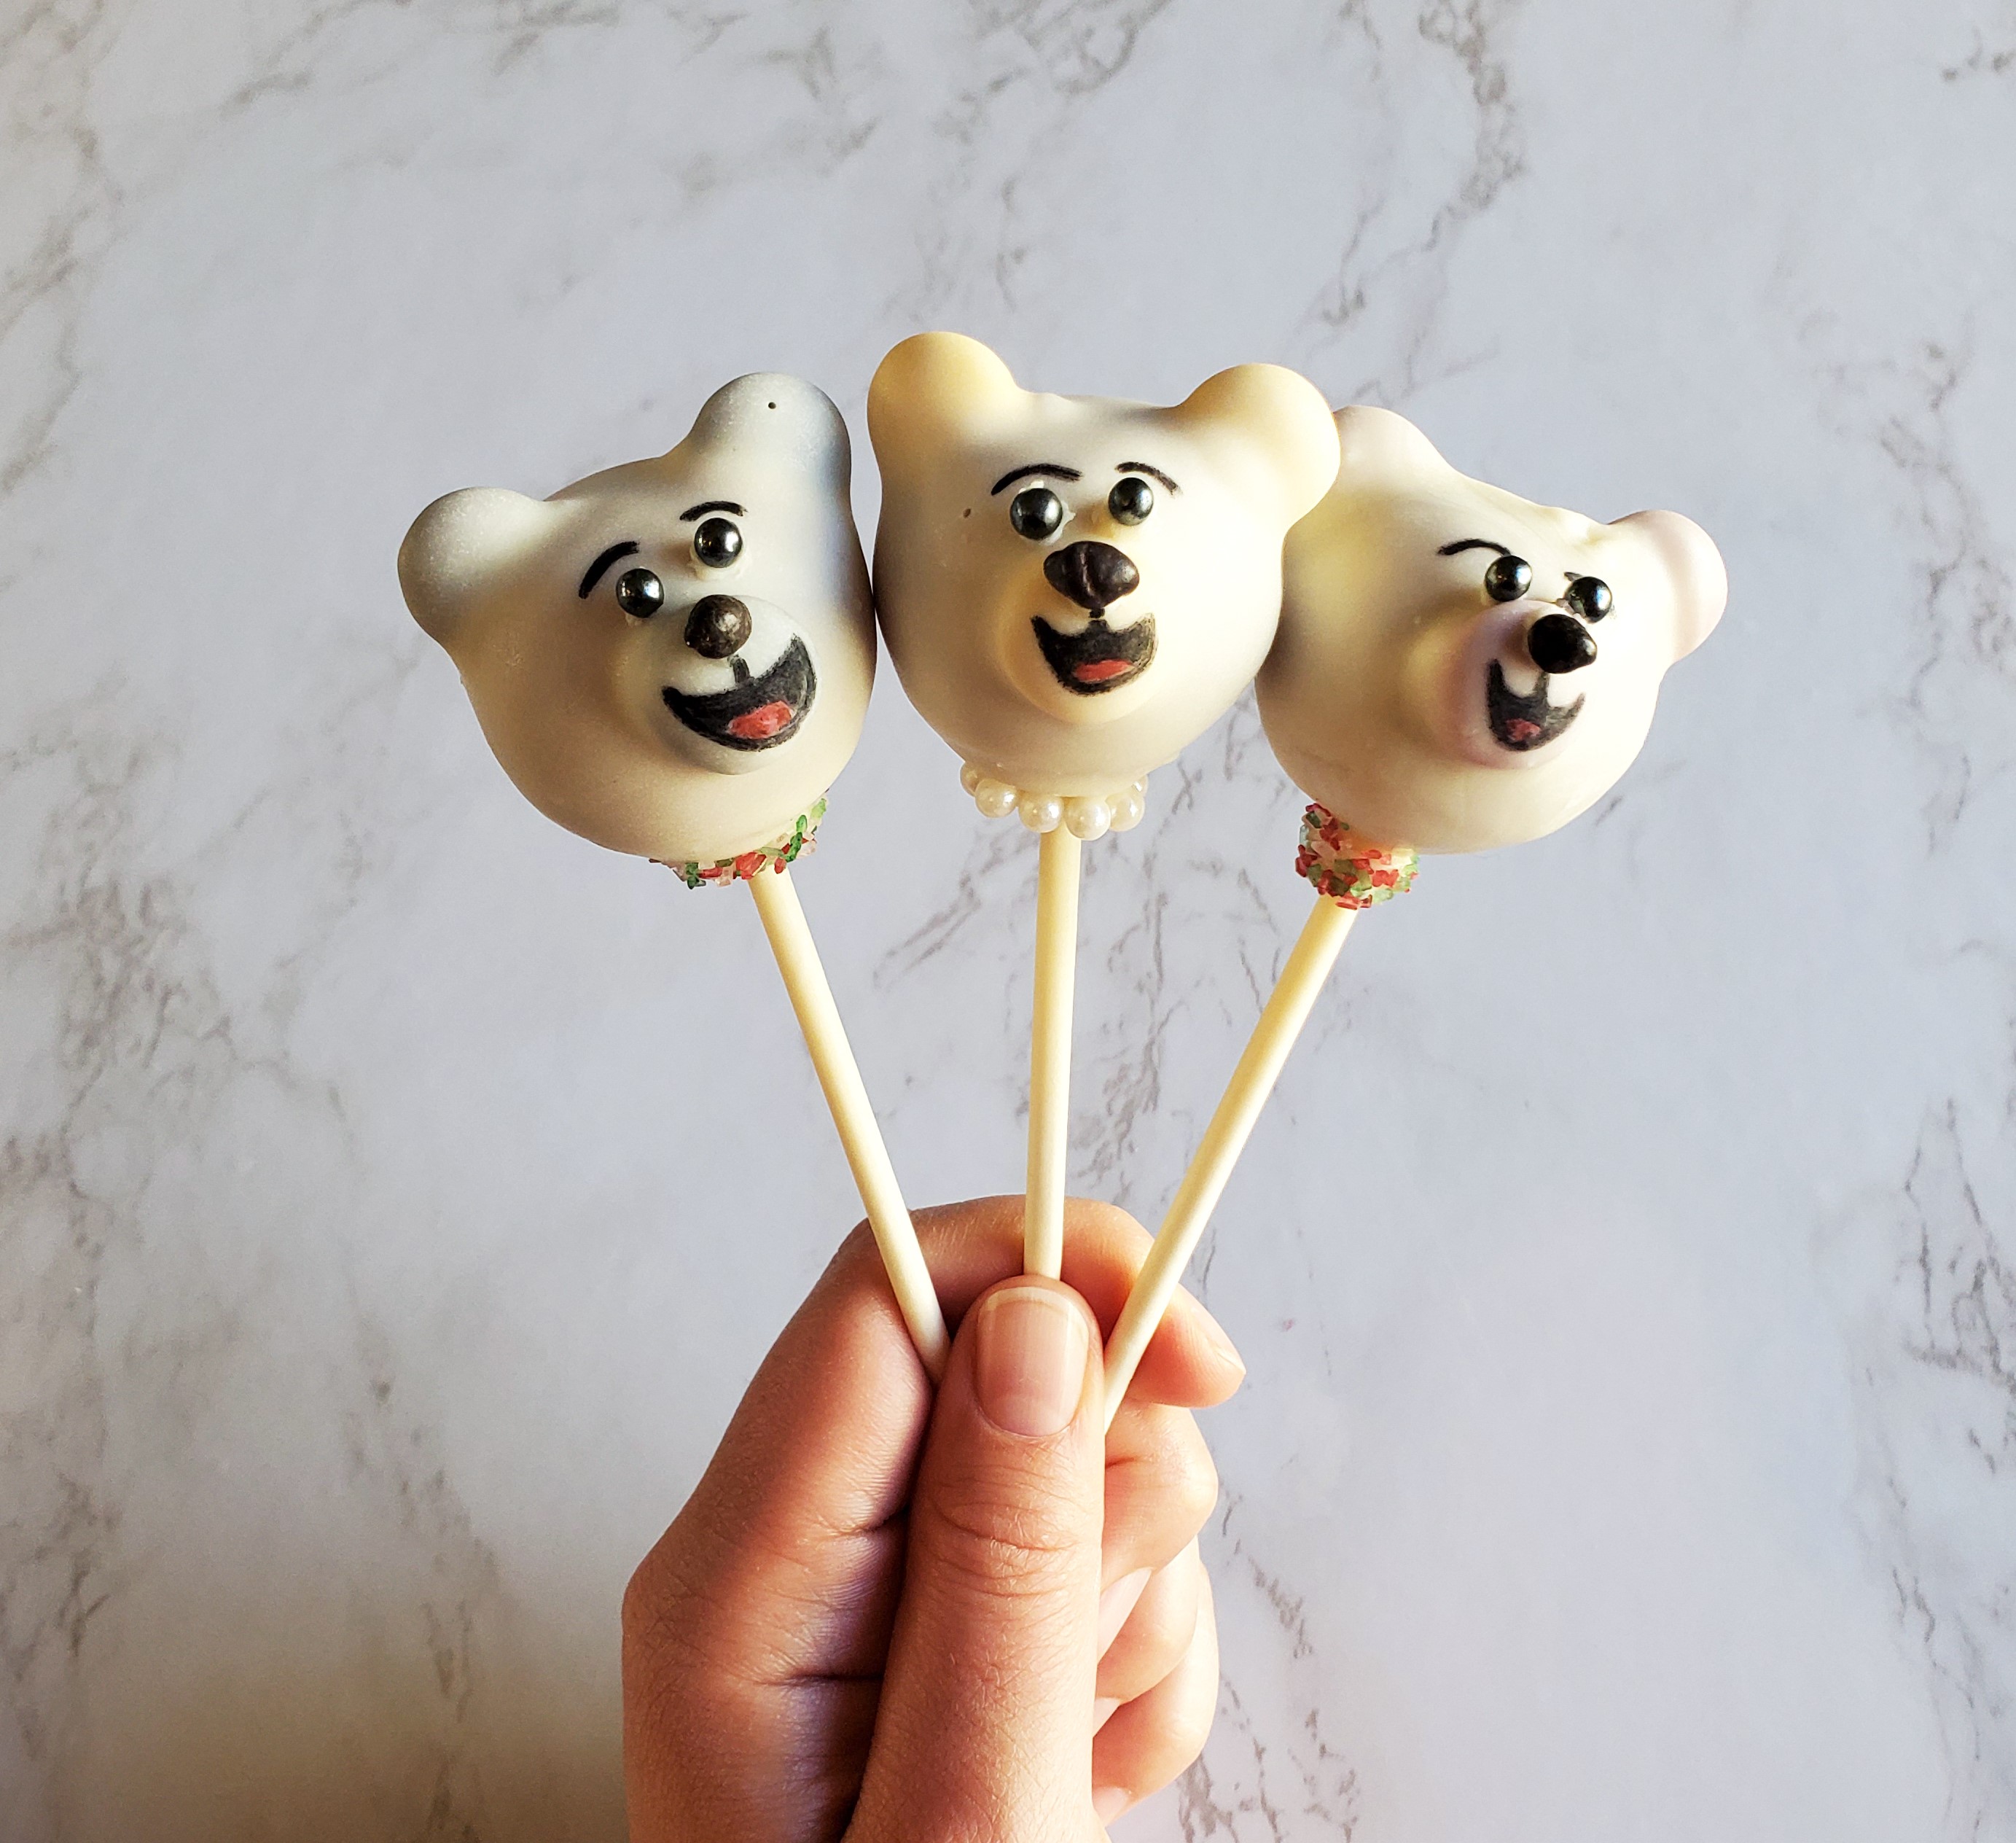 Three Polar Bear cake pops in someone's left hand, in front of a white marbled background. The polar bear face have two black pearl sprinkle eyes, a black candy chip nose and a happy expression drawn on with a food safe marker.